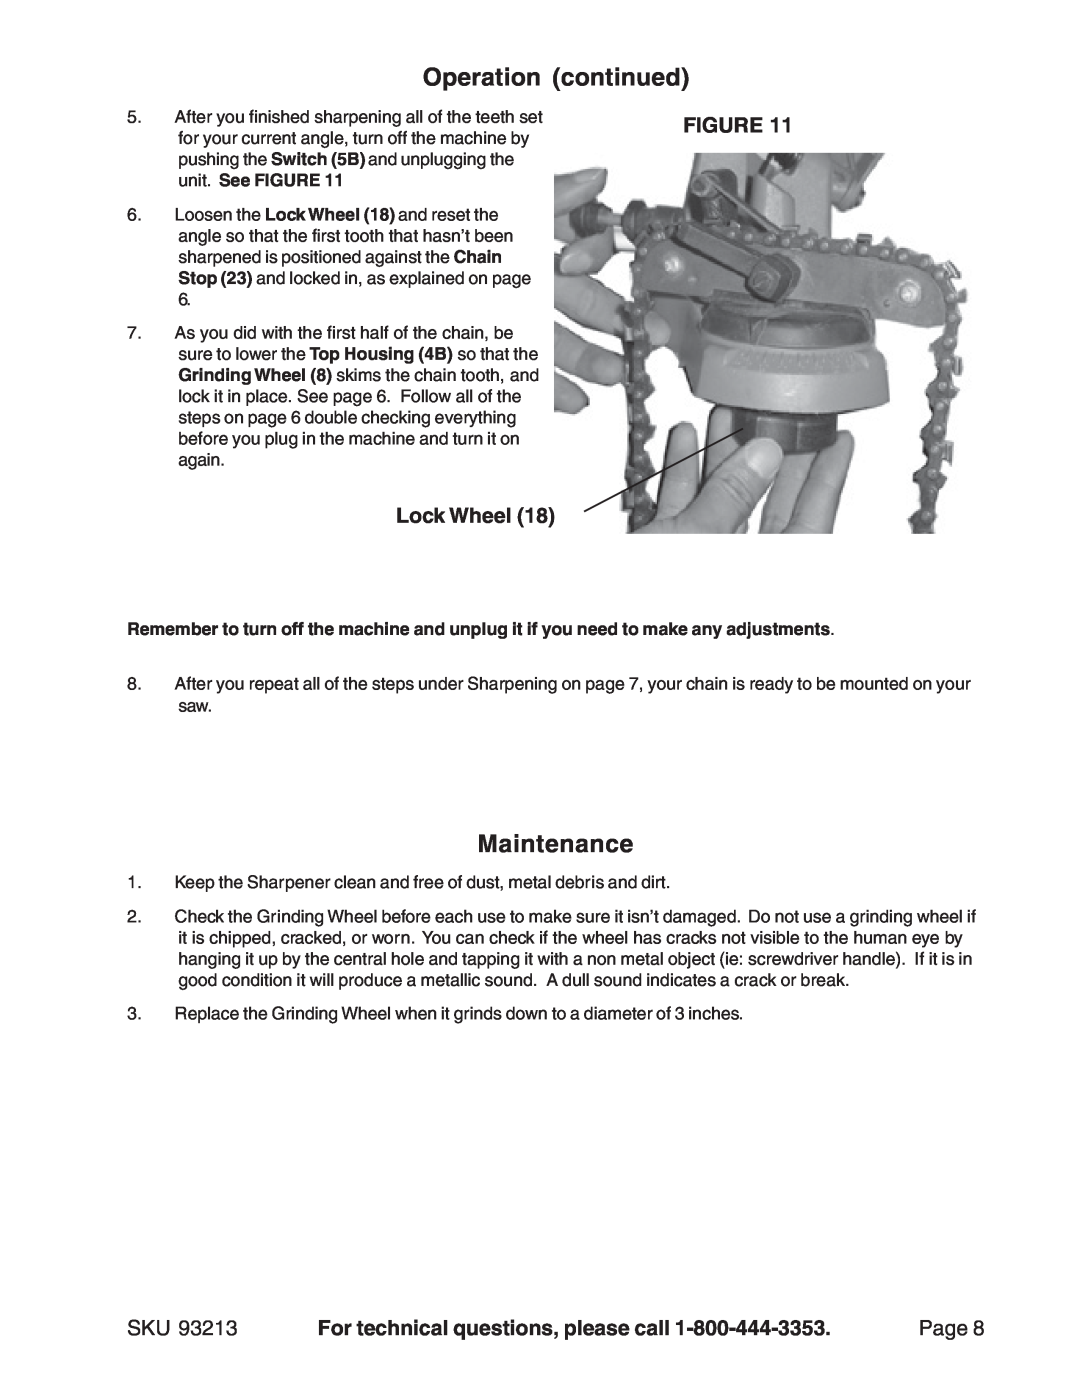 Harbor Freight Tools 93213 manual Maintenance, Operation continued, Lock Wheel, For technical questions, please call, Page 